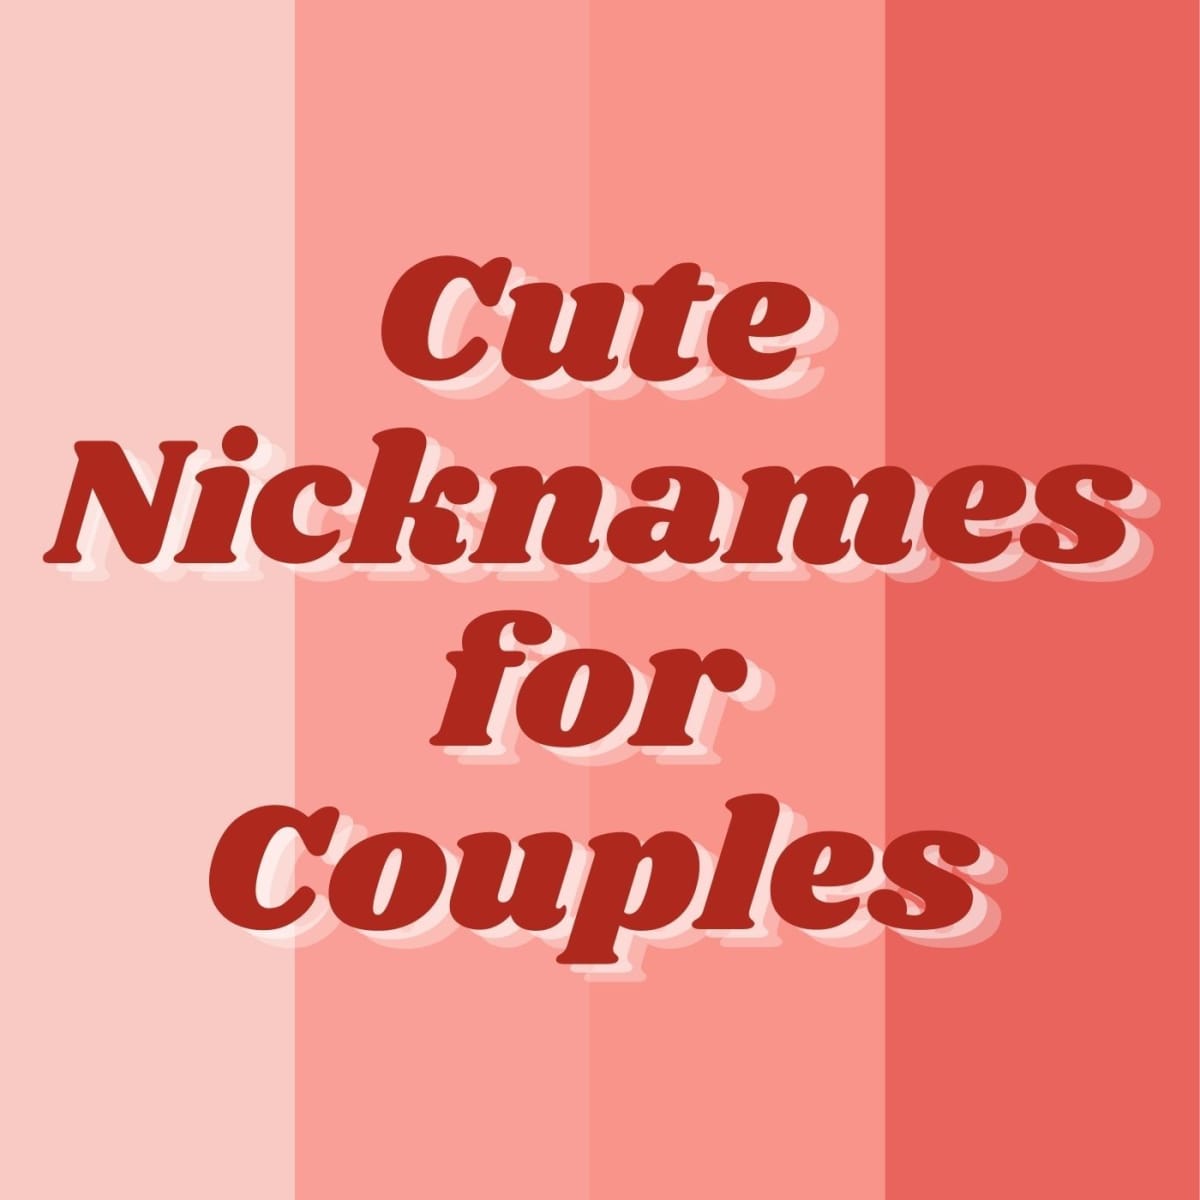 Cute and Funny Nicknames for Couples - PairedLife